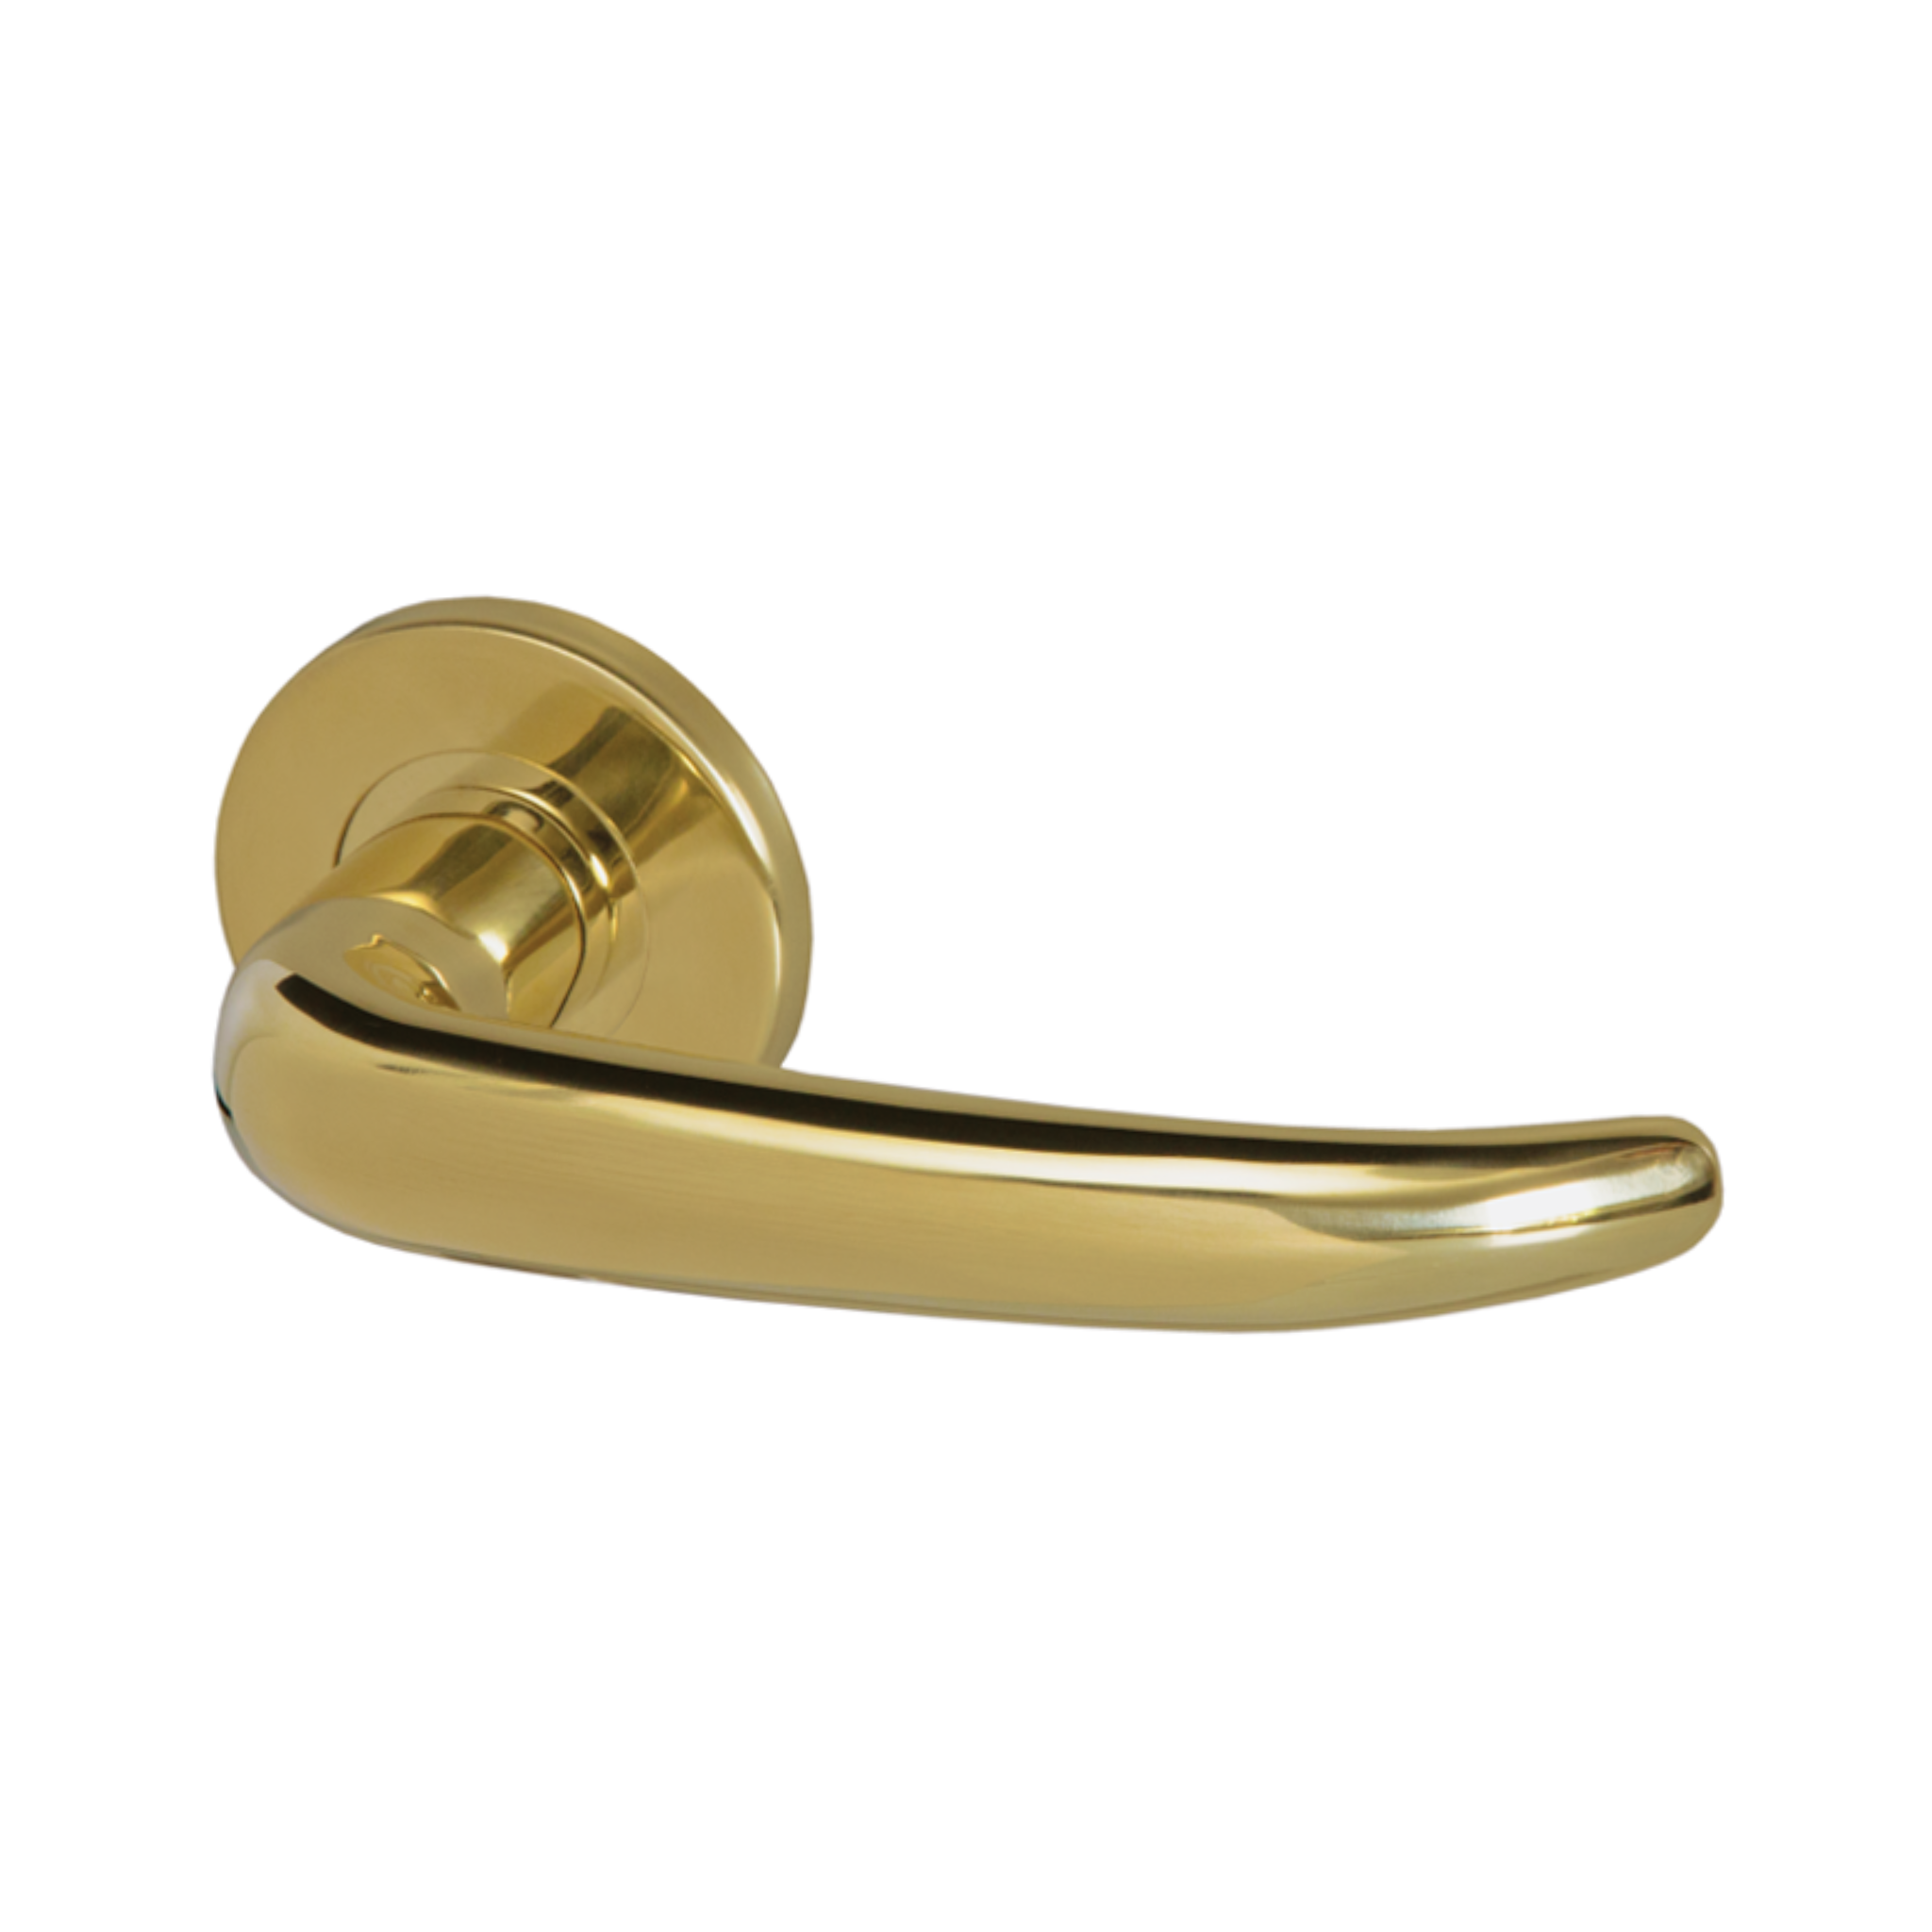 Riga PVD, Lever Handles, Form, On Round Rose, With Escutcheons, PVD Brass, QS